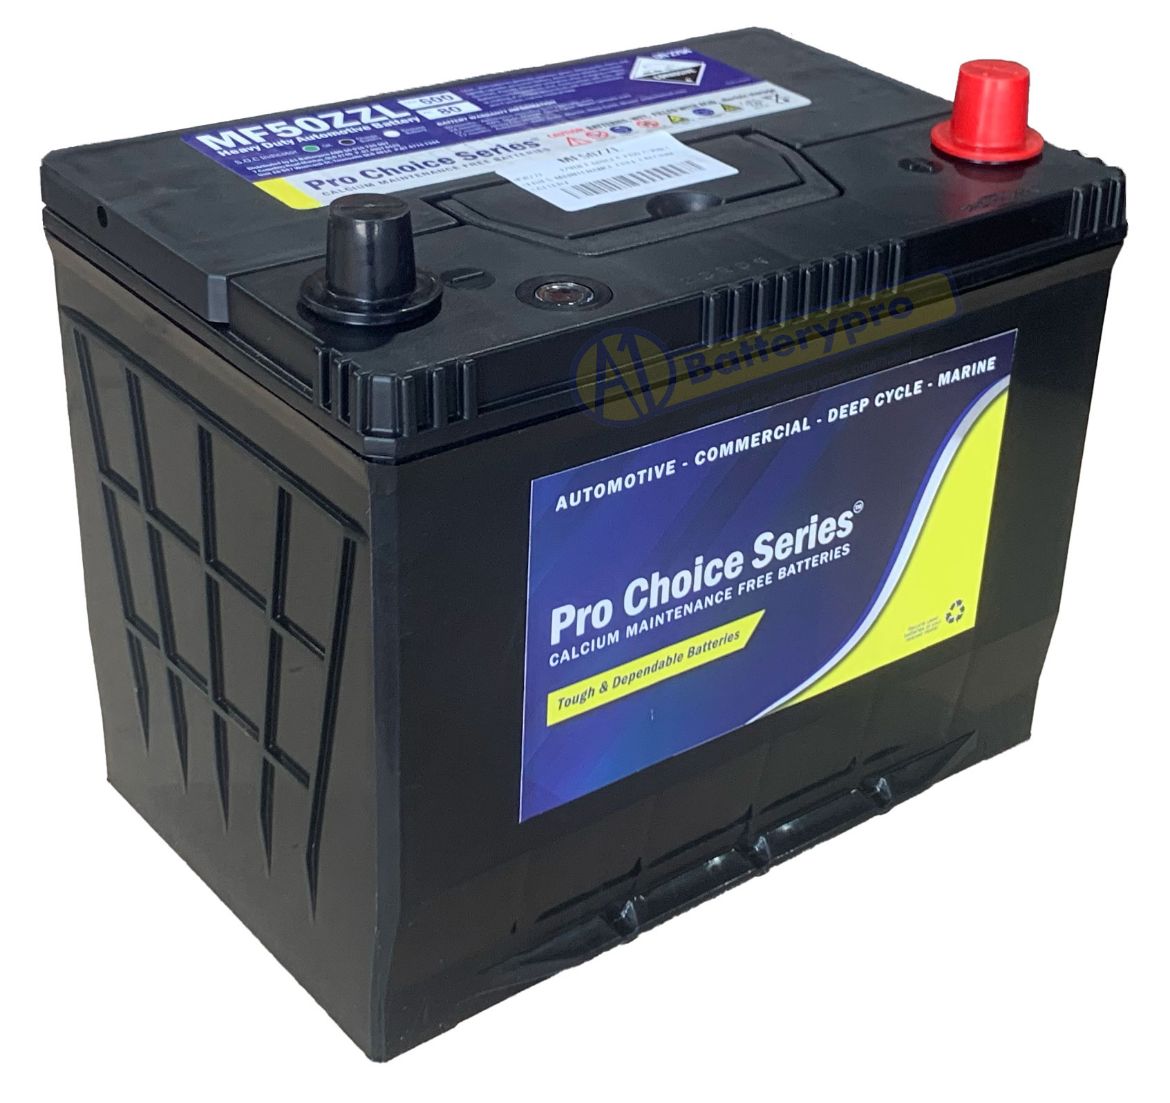 Picture of N50ZZL - 12VOLT 600CCA PRO CHOICE SERIES MAINTENANCE FREE CALCIUM BATTERY